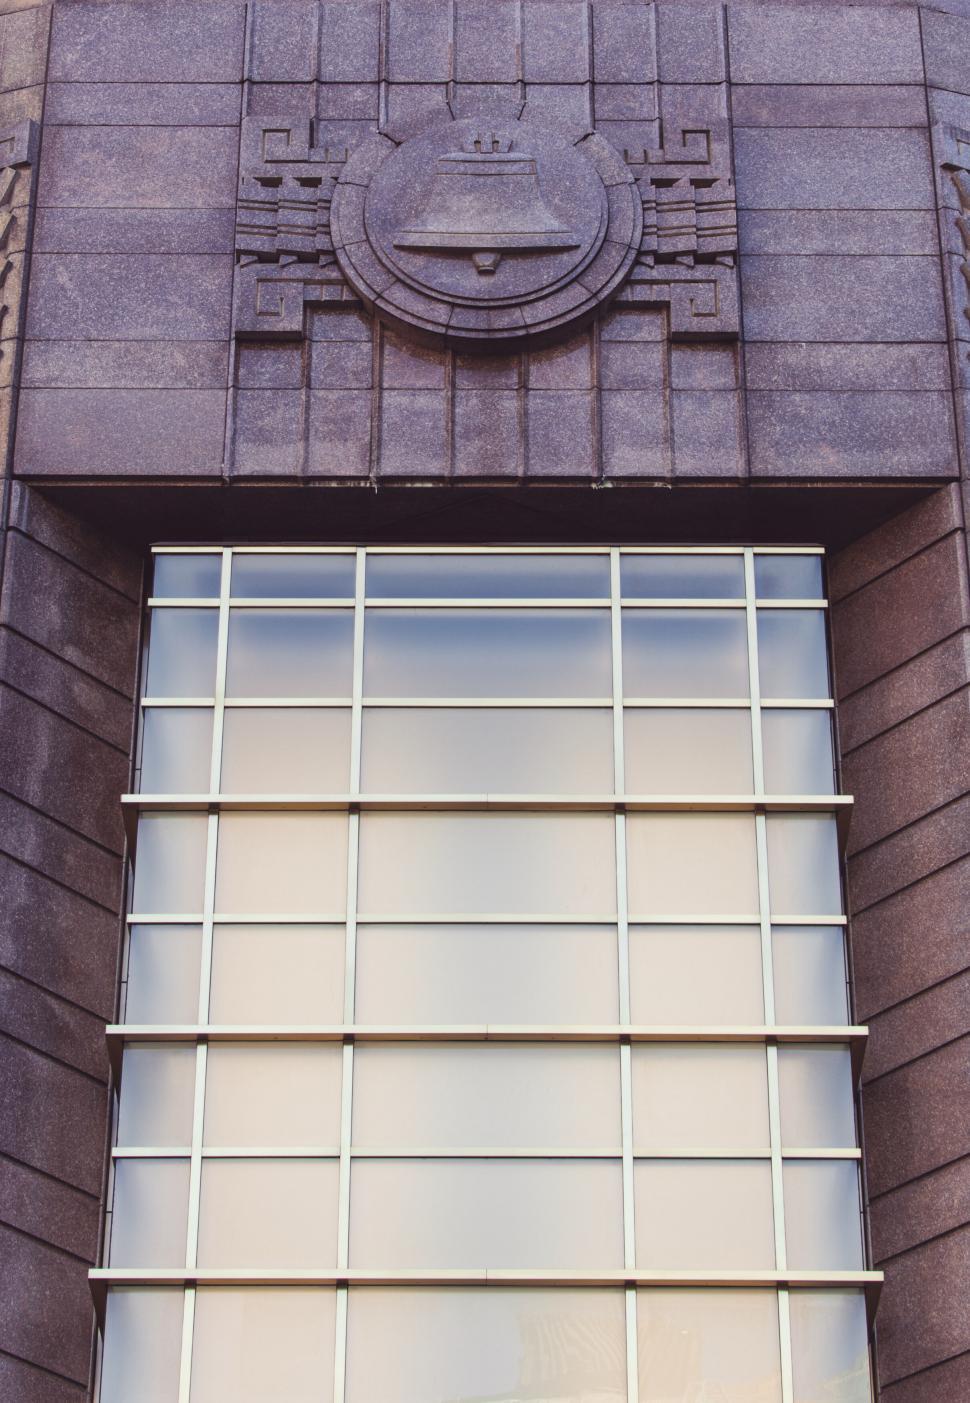 Free Image of Emblem and windows on an art deco building 